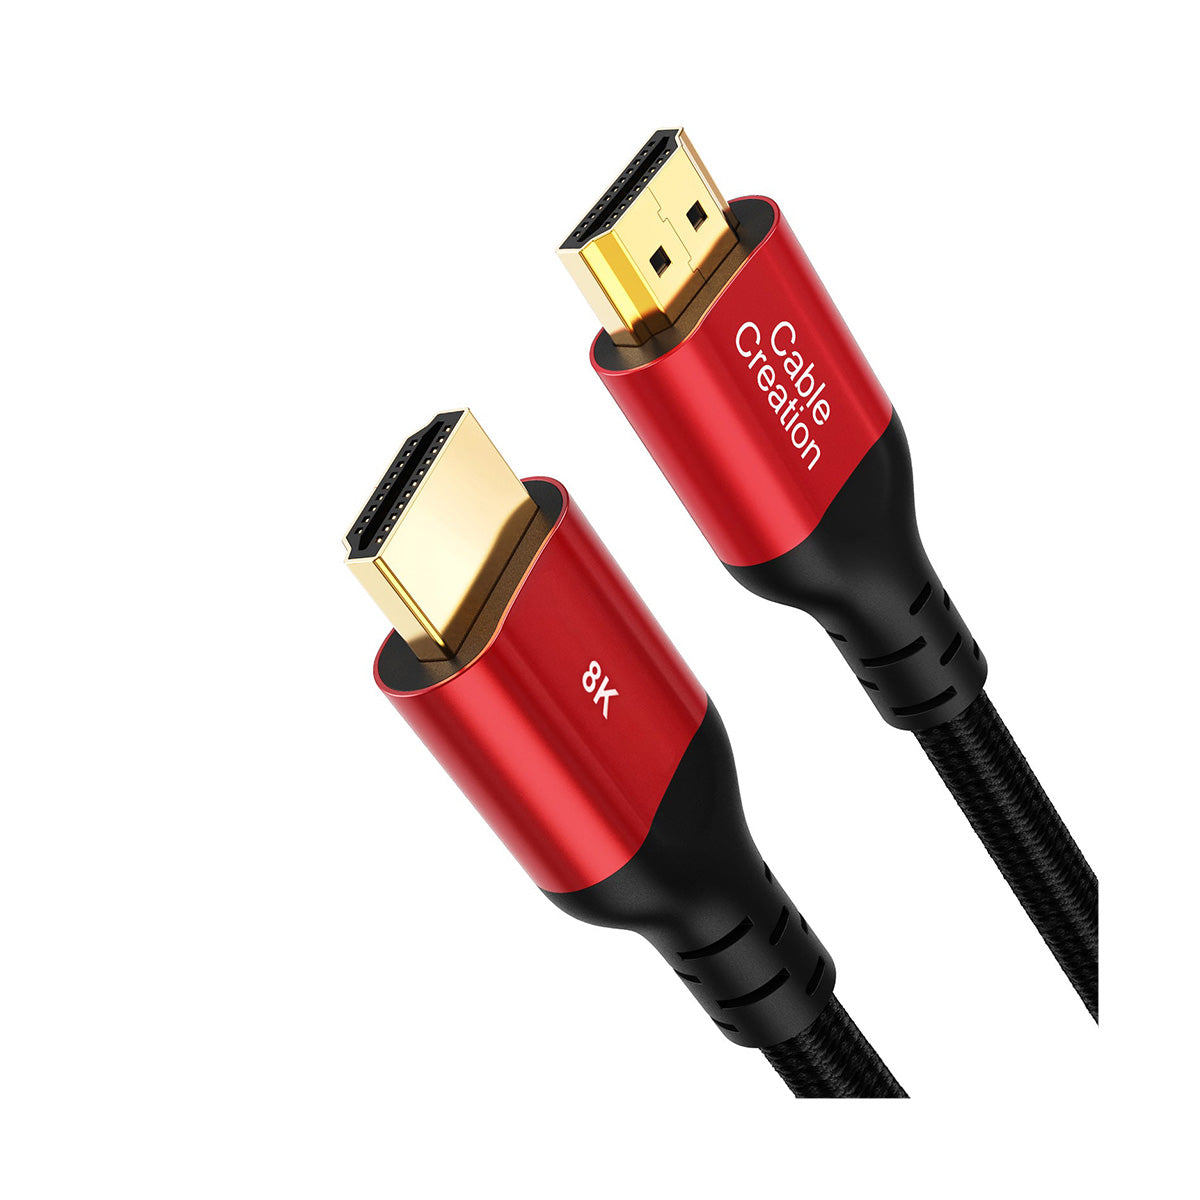 Certified Ultra HD 8K HDMI 2.1 Cable